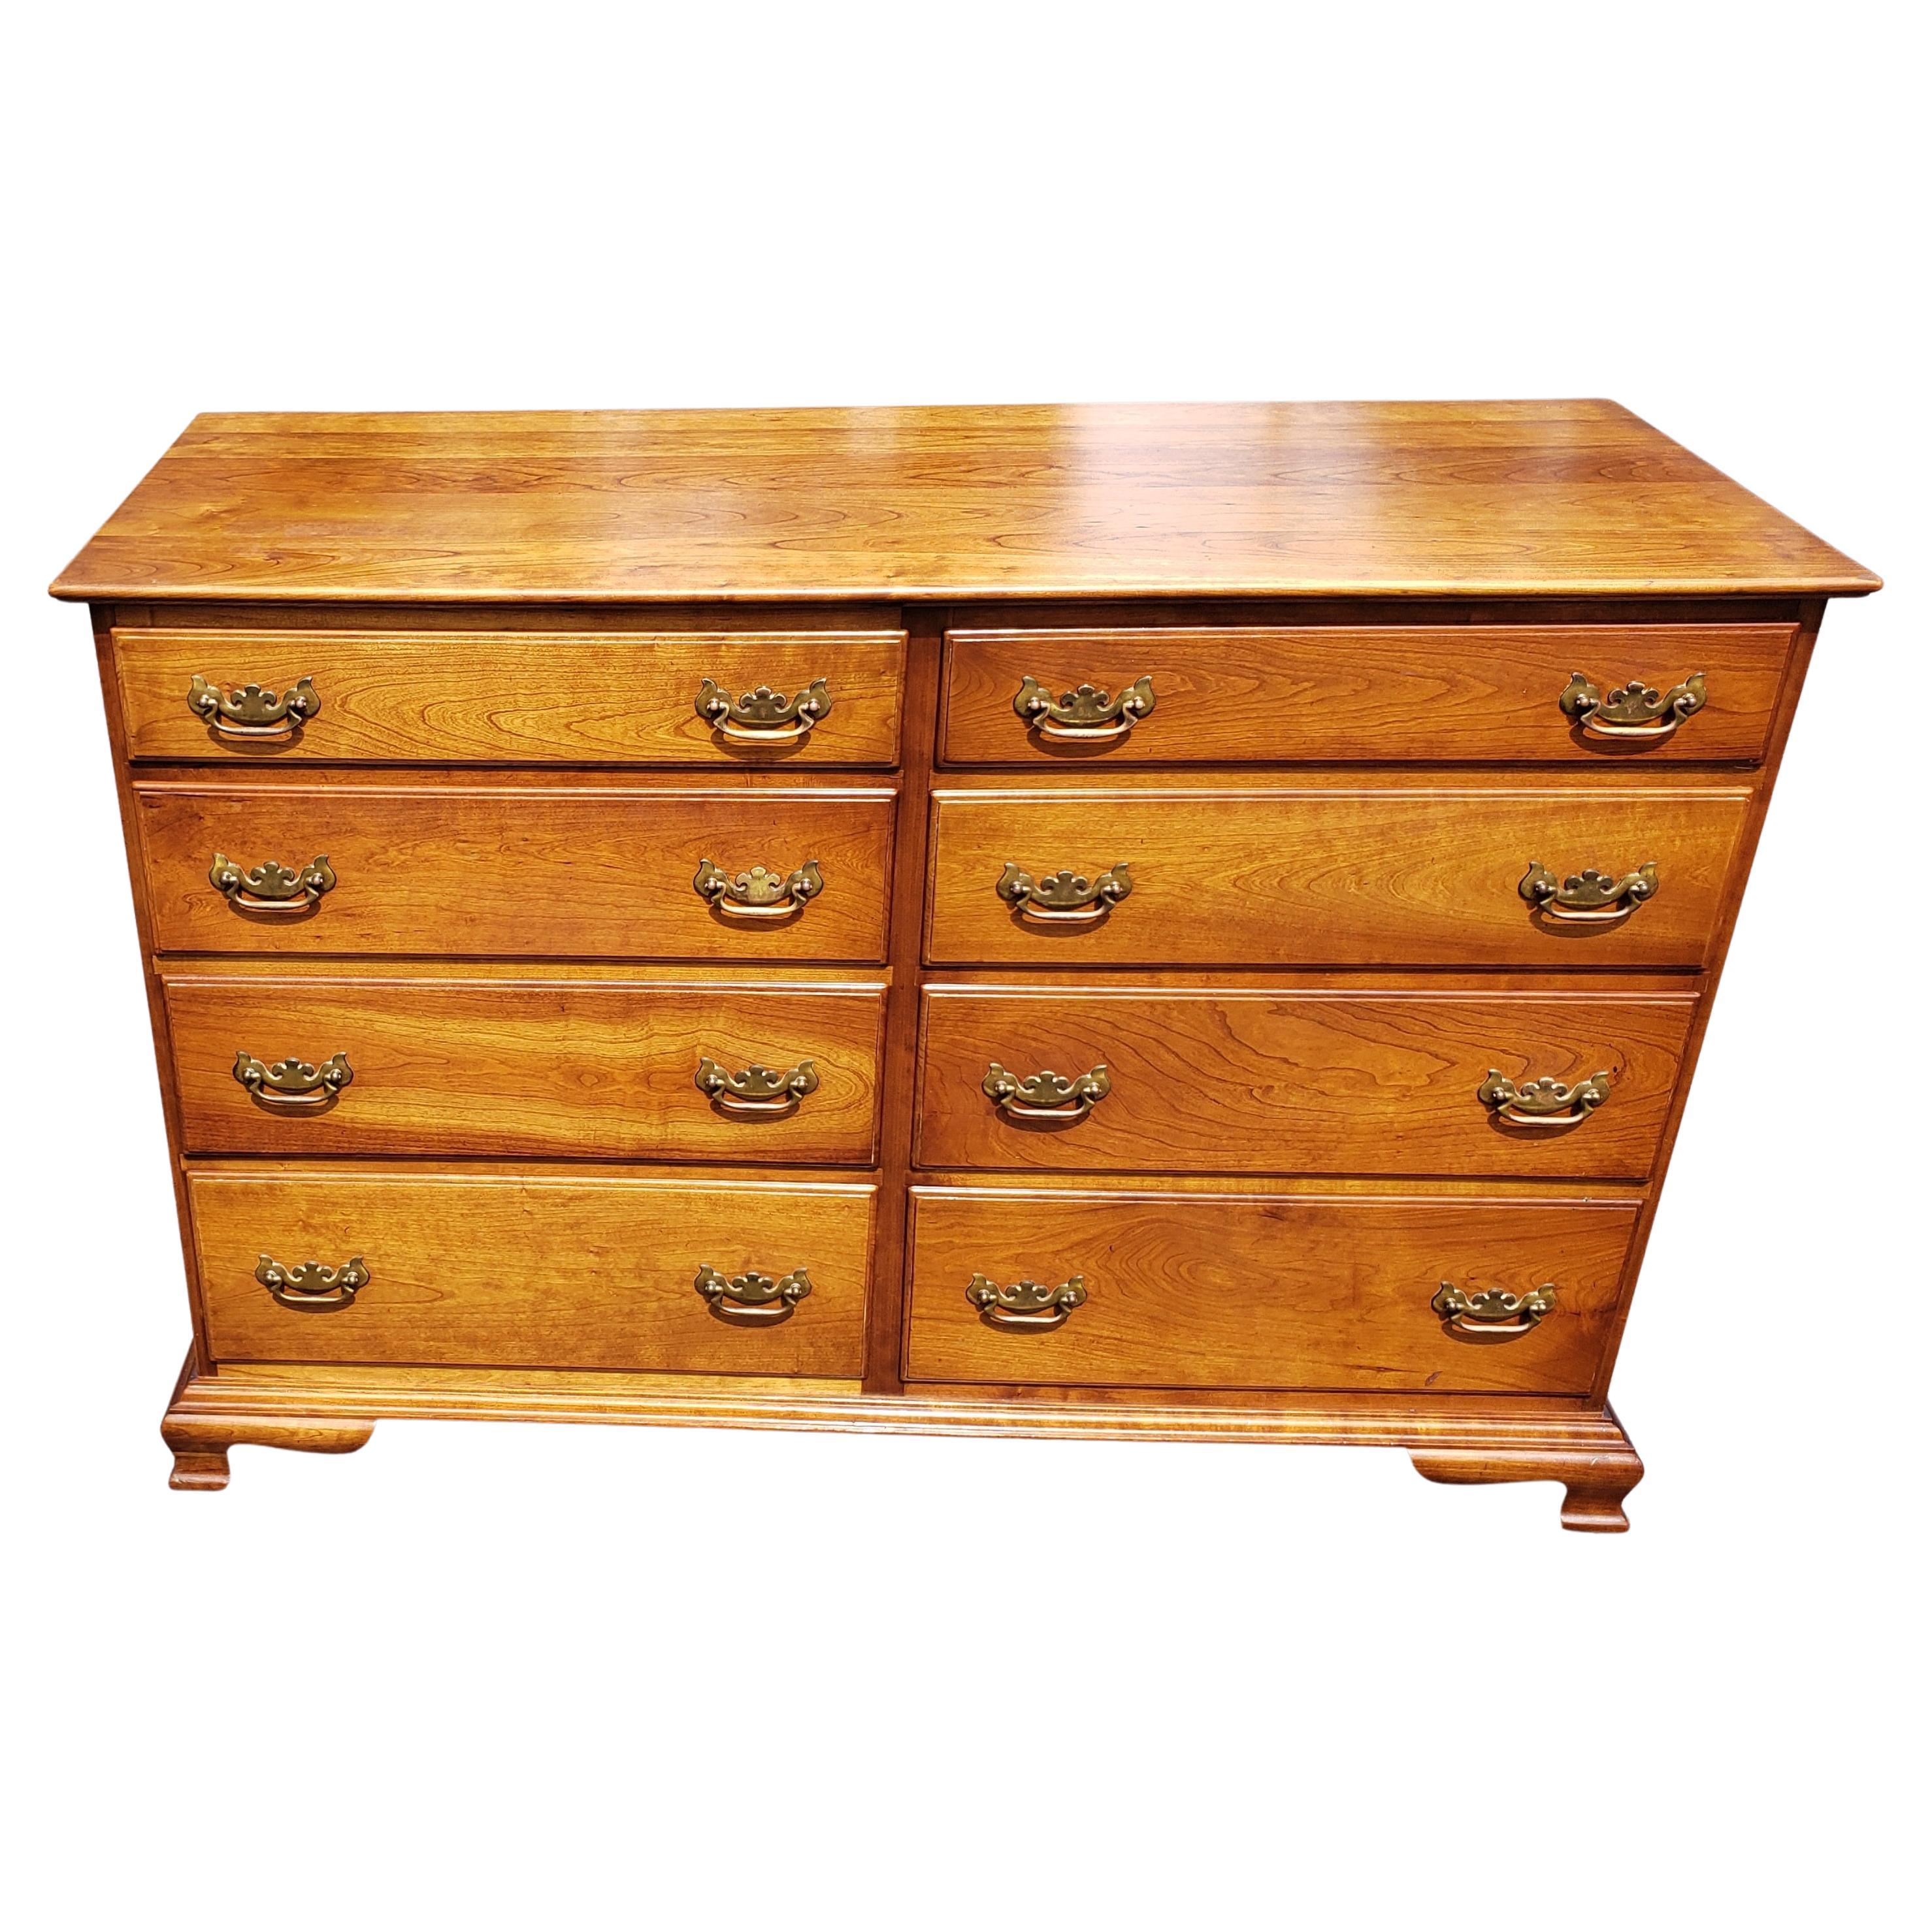 A 1957 eight drawer Cherry dresser by Stickley Furniture. Features eight drawers with pull handles made of brass. 
The front corners feature fluted columns. There is minor wear from use; Dresser is in good condition. 
Measures 52.5